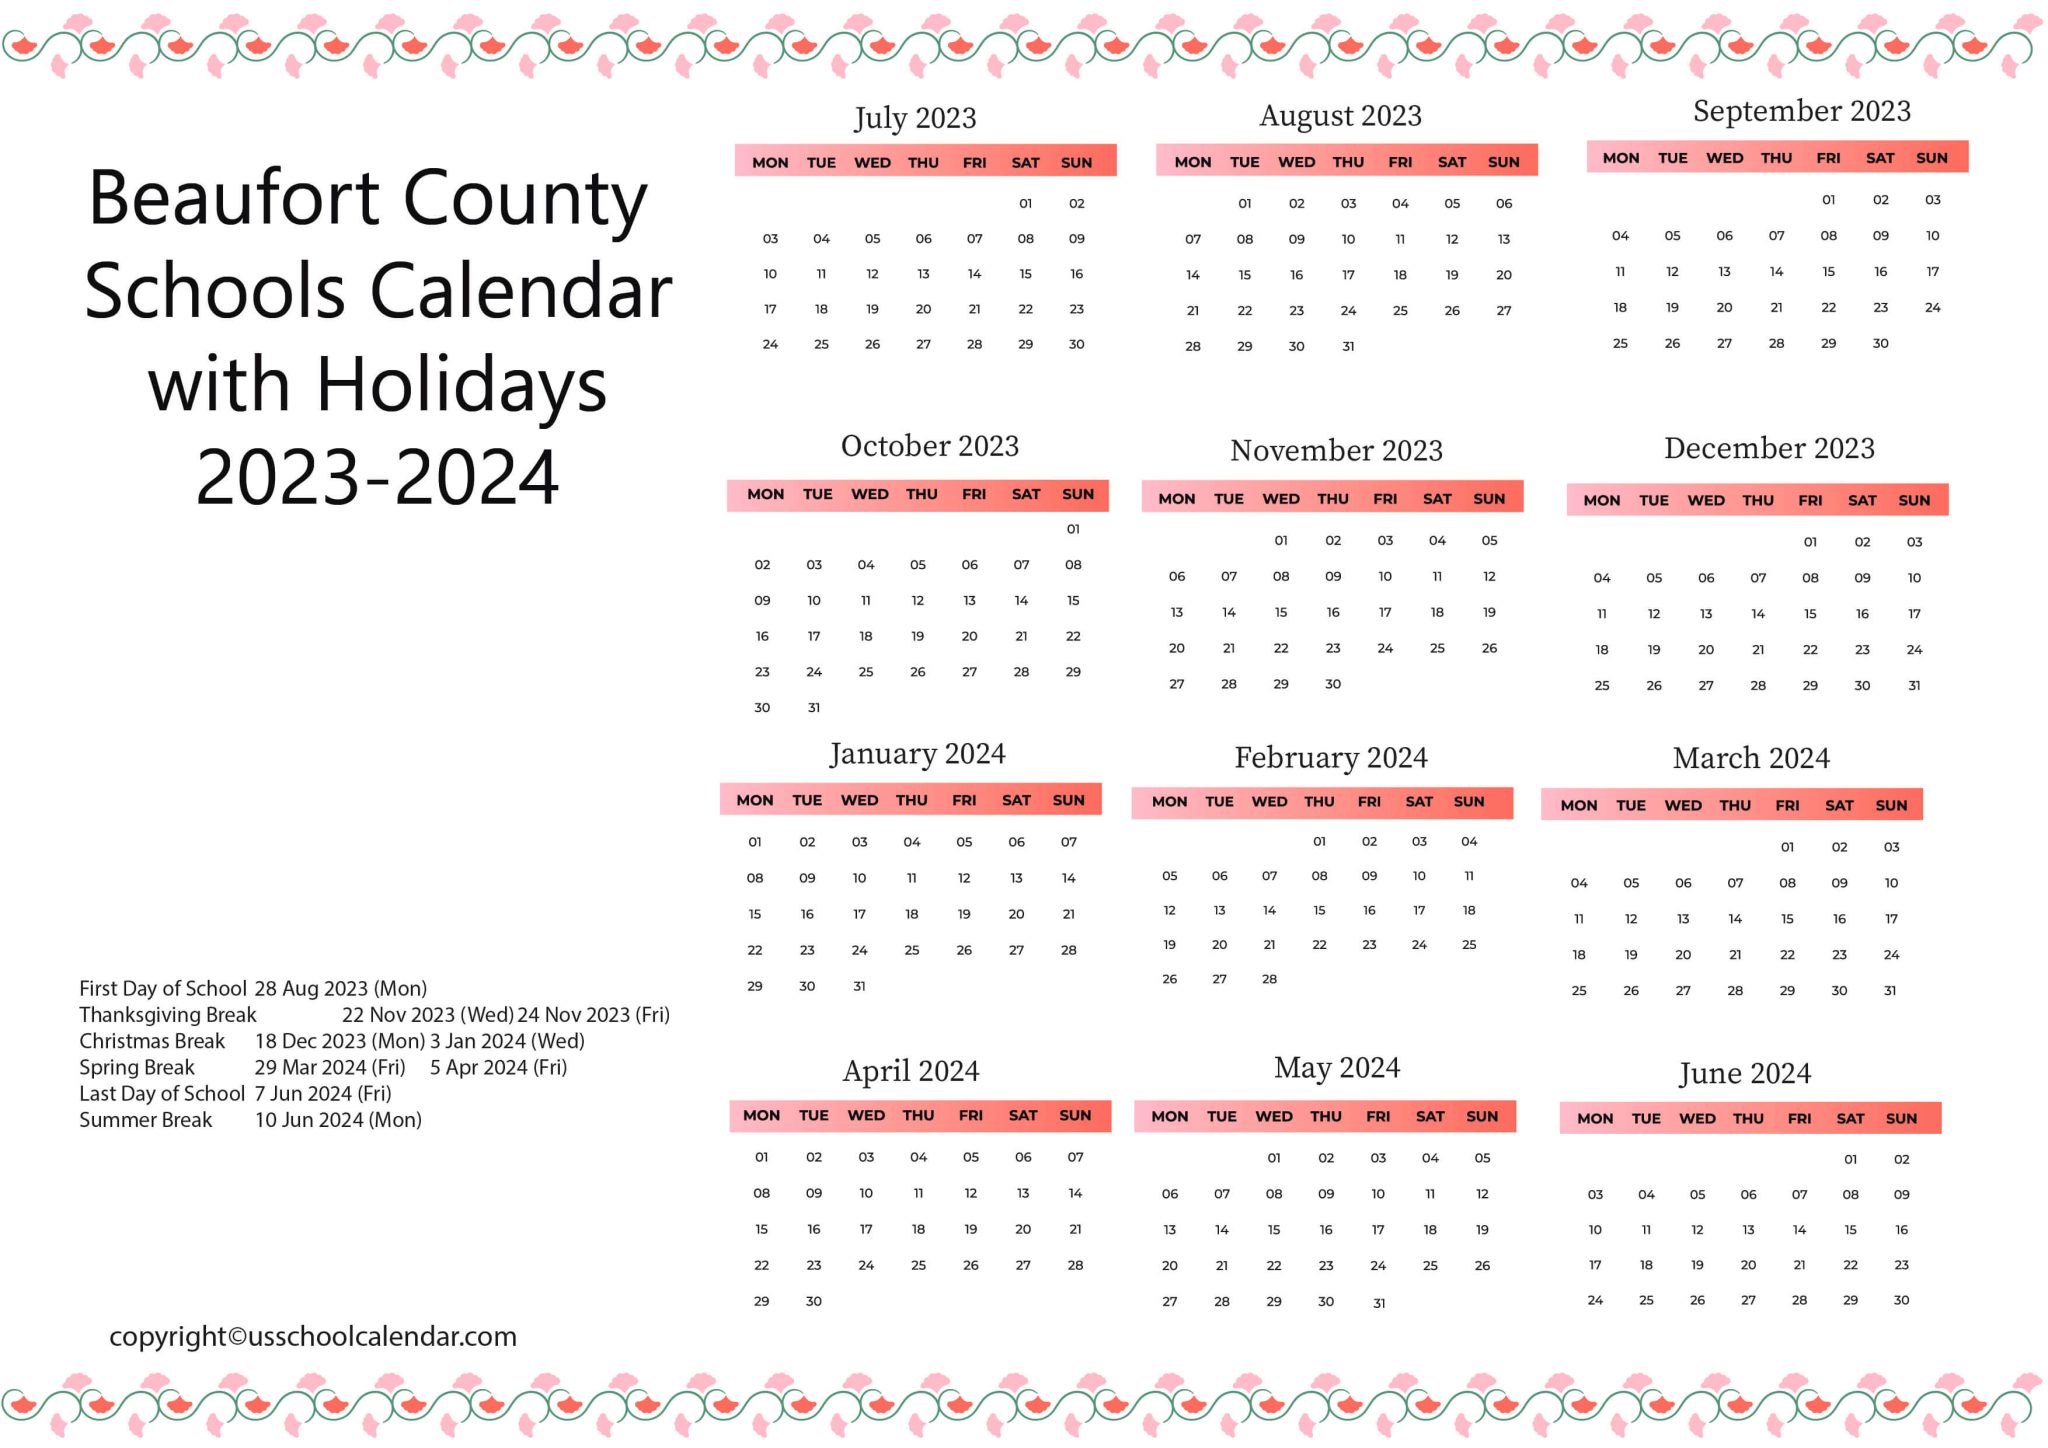 Beaufort County Schools Calendar with Holidays 2023 2024